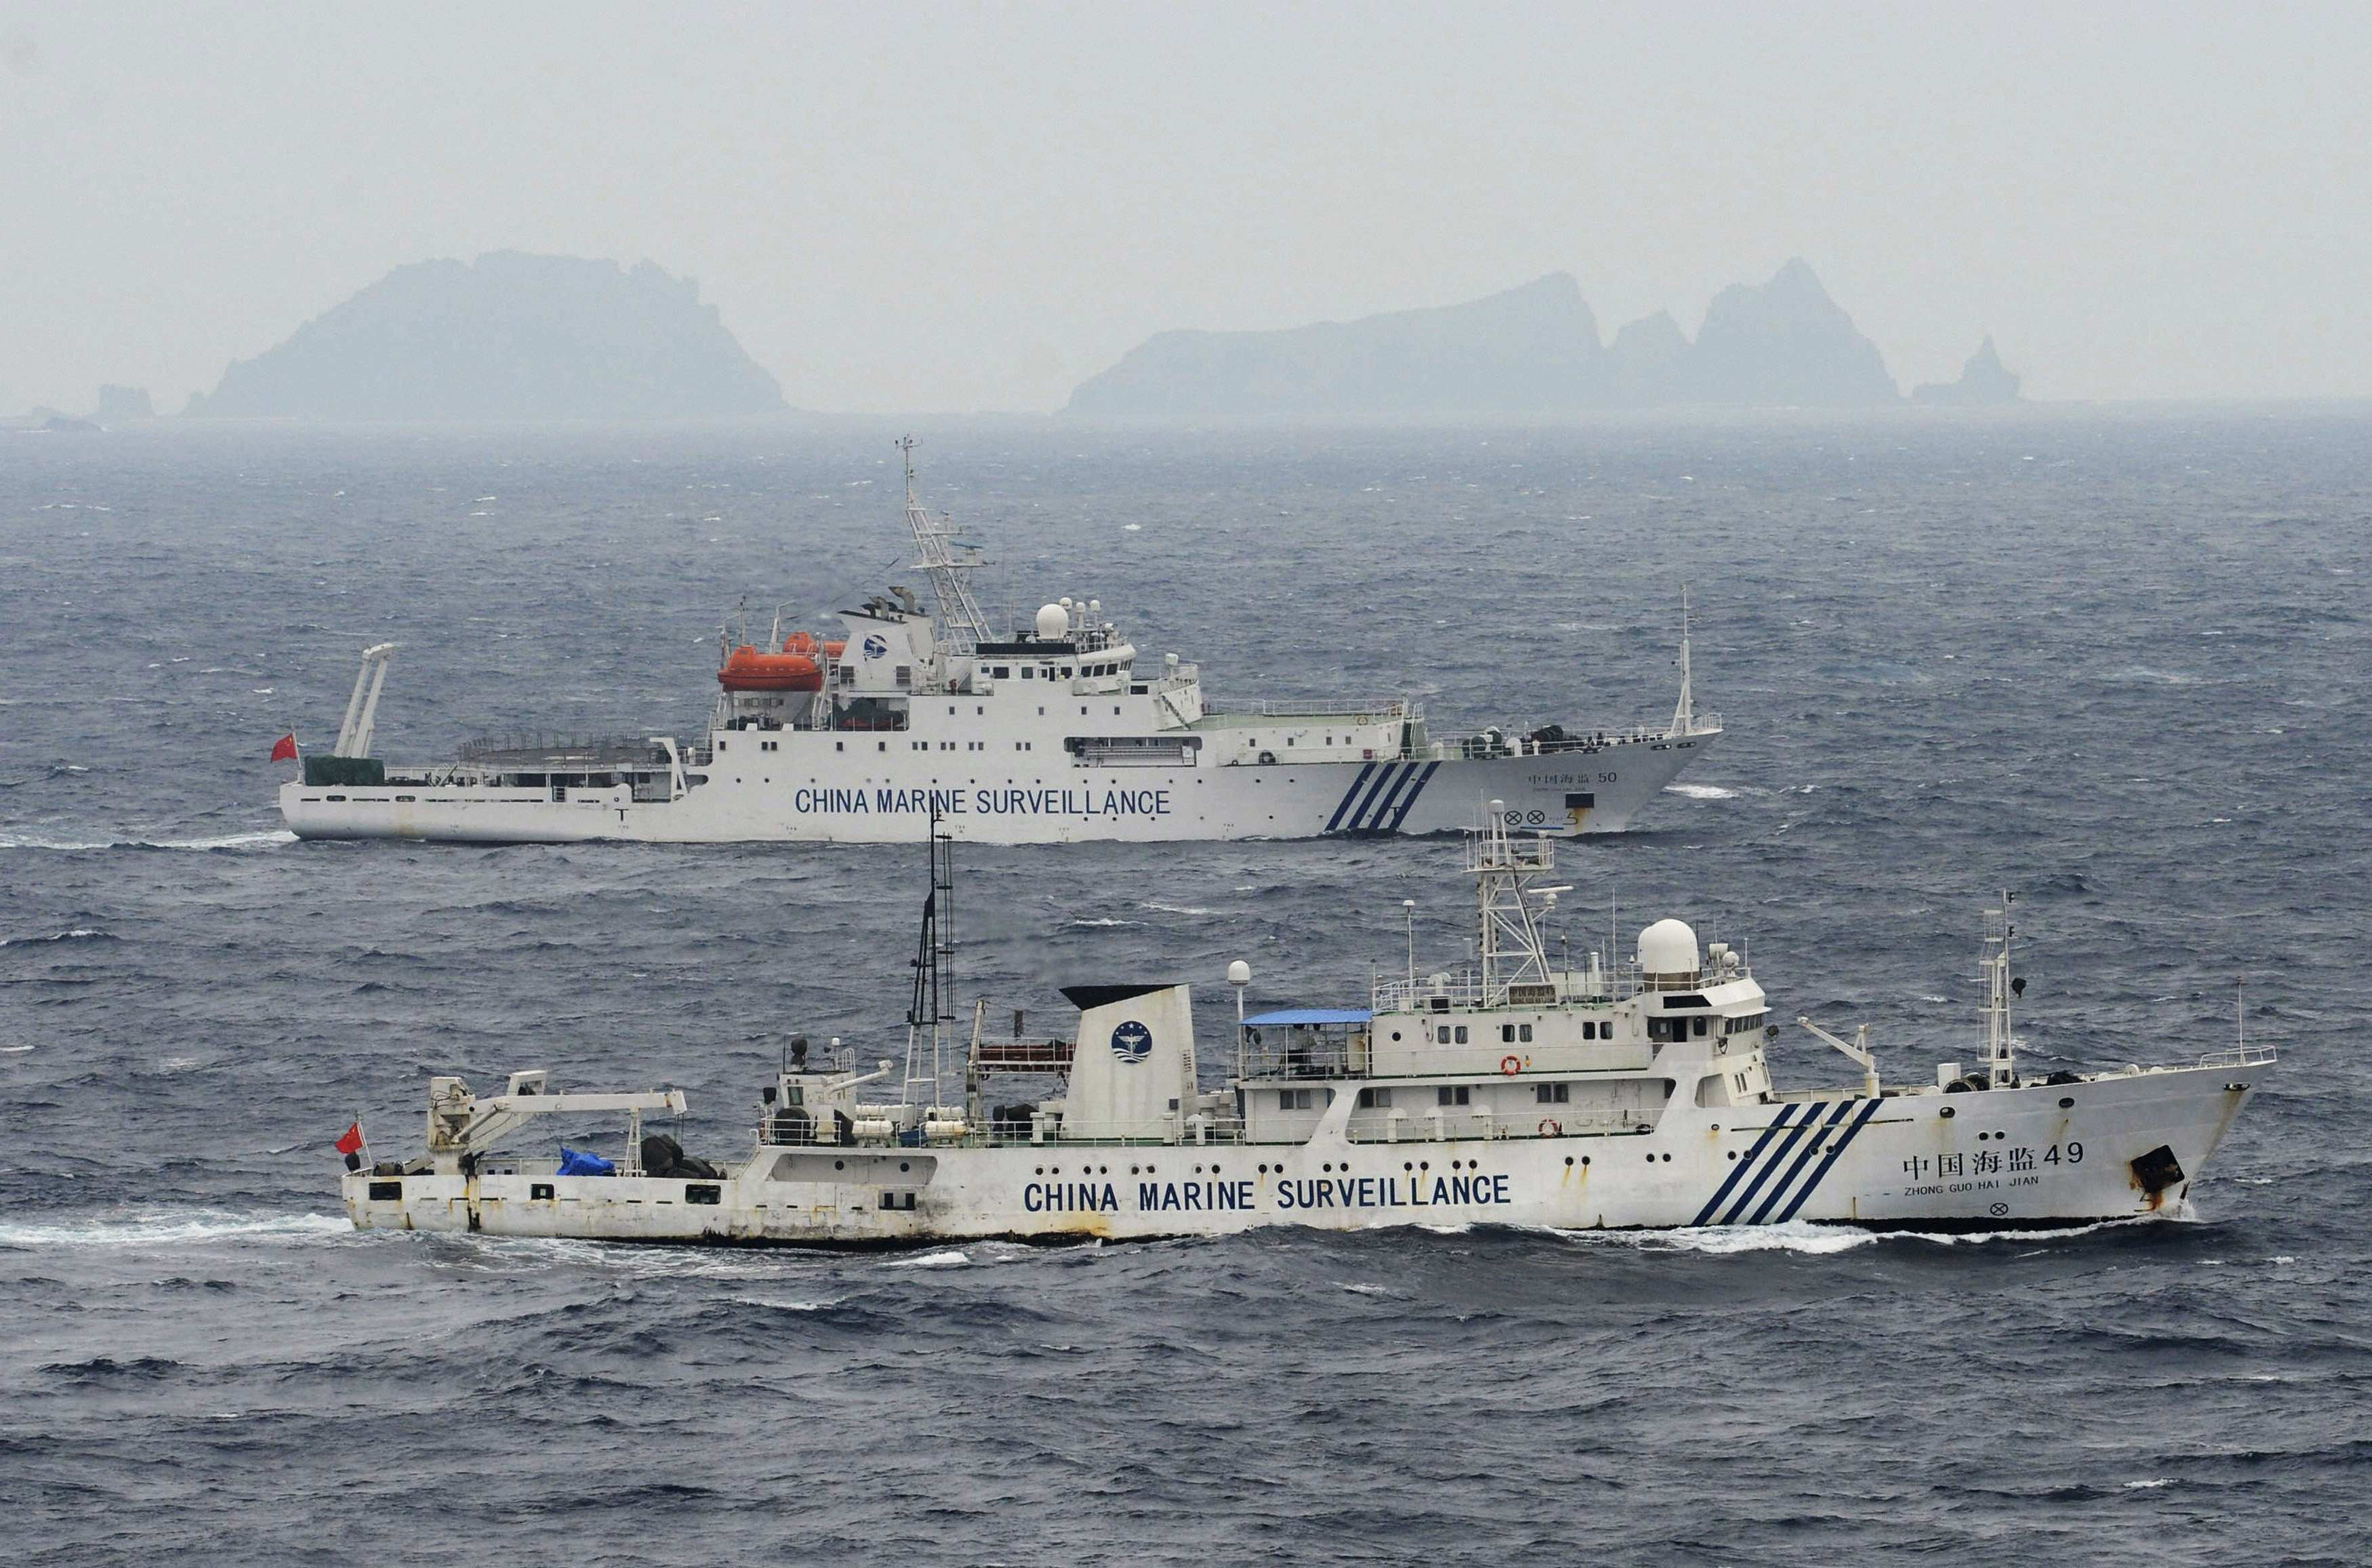 Chinese marine surveillance ships cruising in the East China Sea near the disputed Diaoyu Islands, also known as the Senkaku isles in Japan, on April 23, 2013. Photo: Reuters